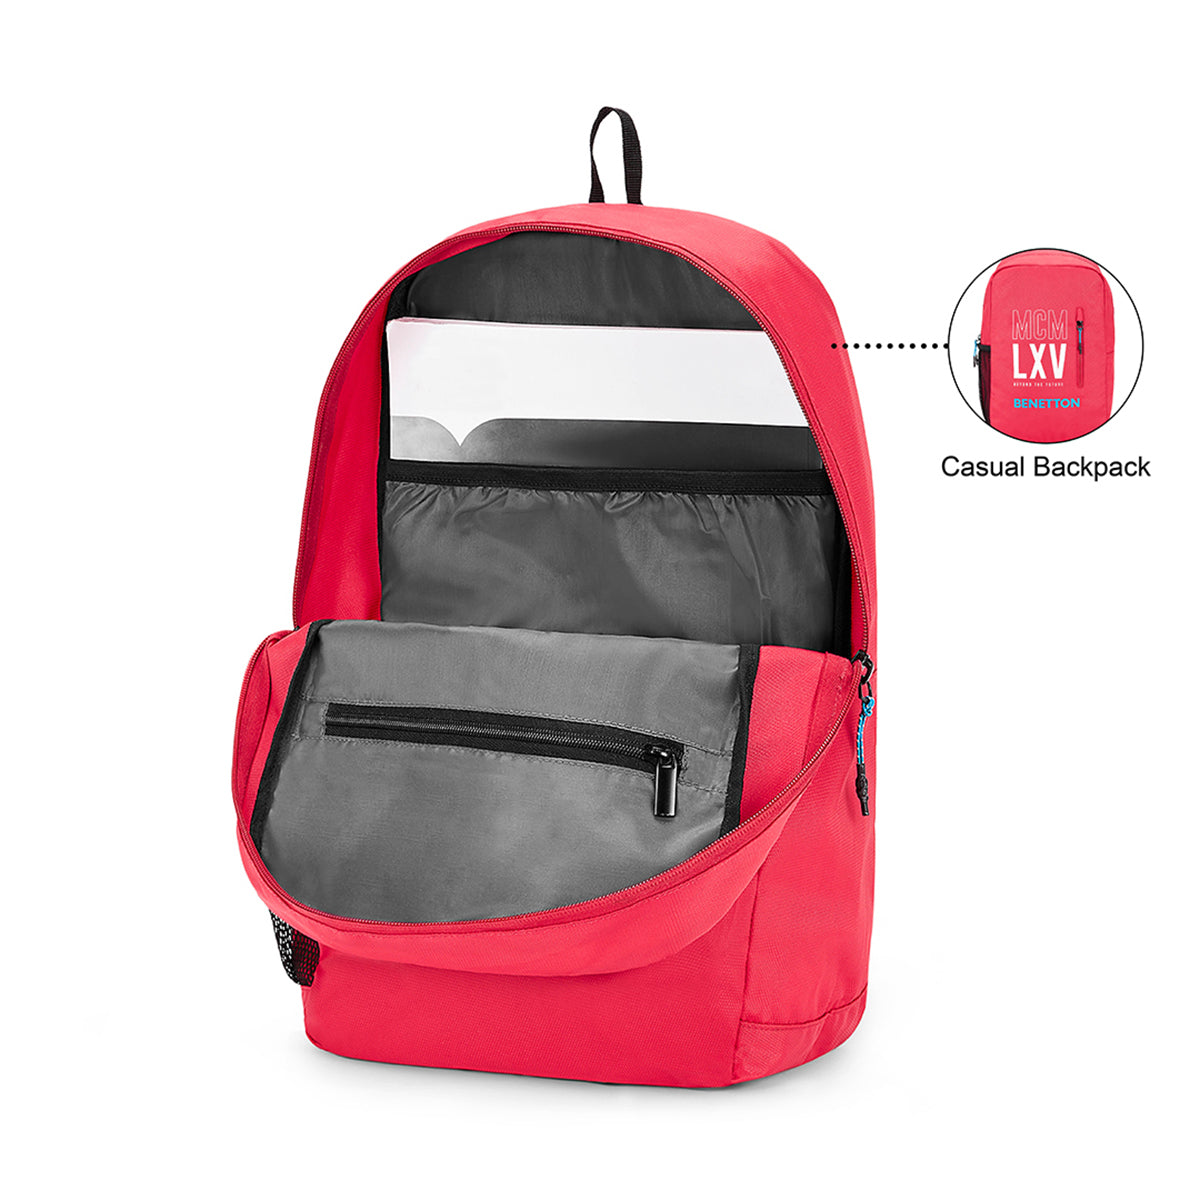 United Colors of Benetton Caspian Laptop Backpack Red